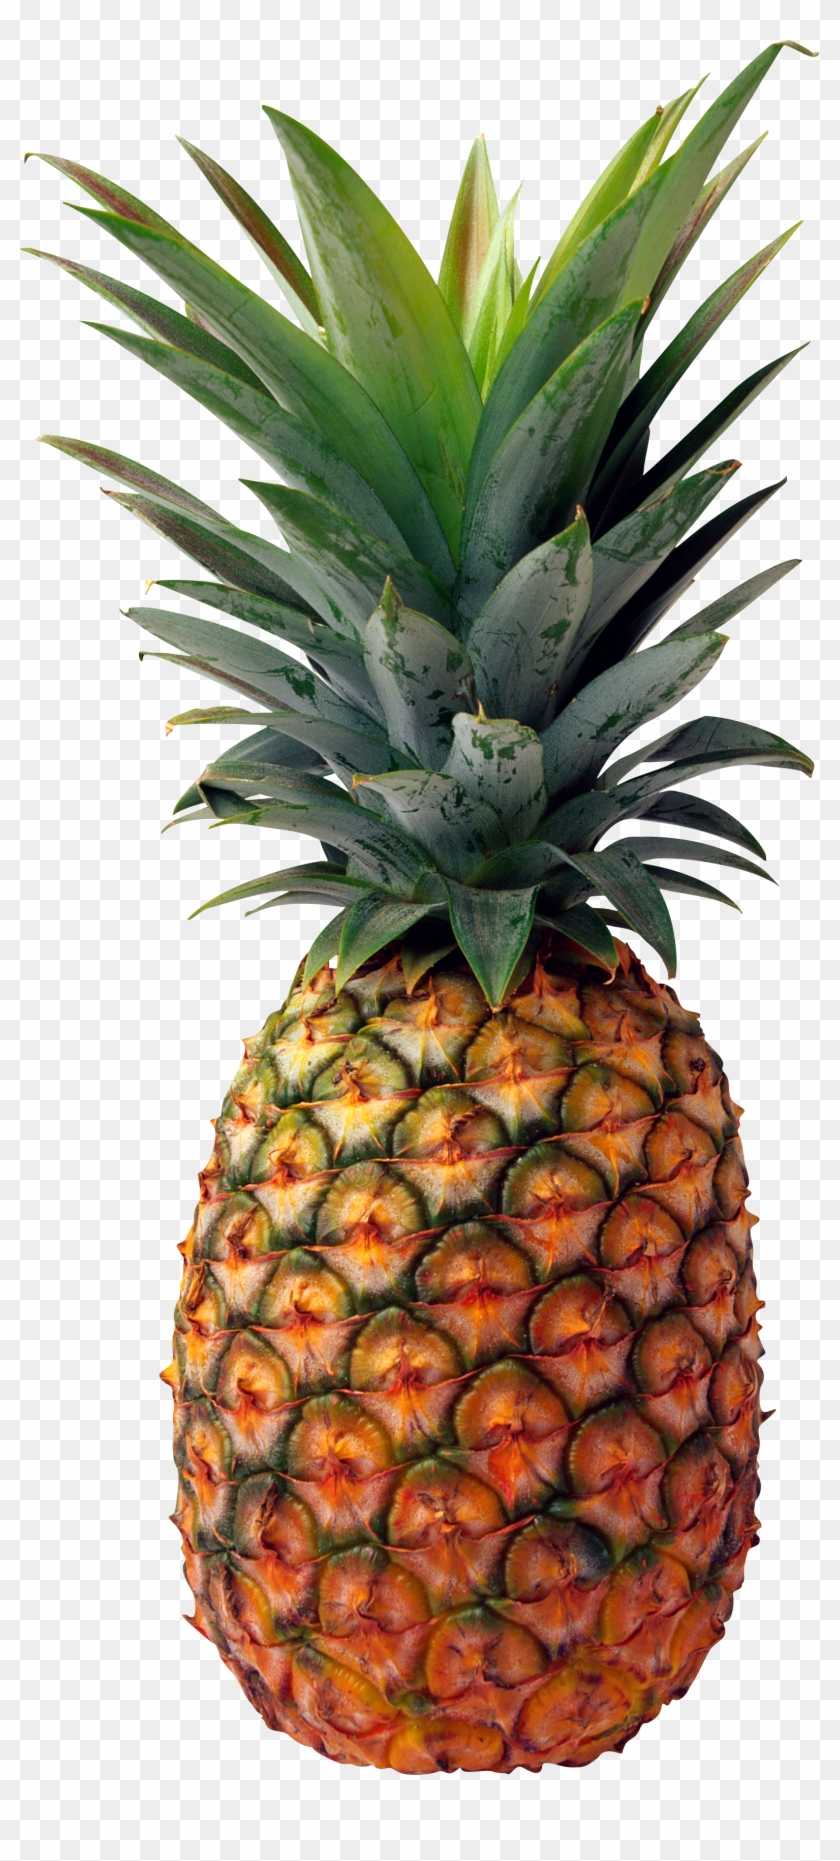 Pineapple Png Image, Free Download - Pineapple Png Clipart #598679